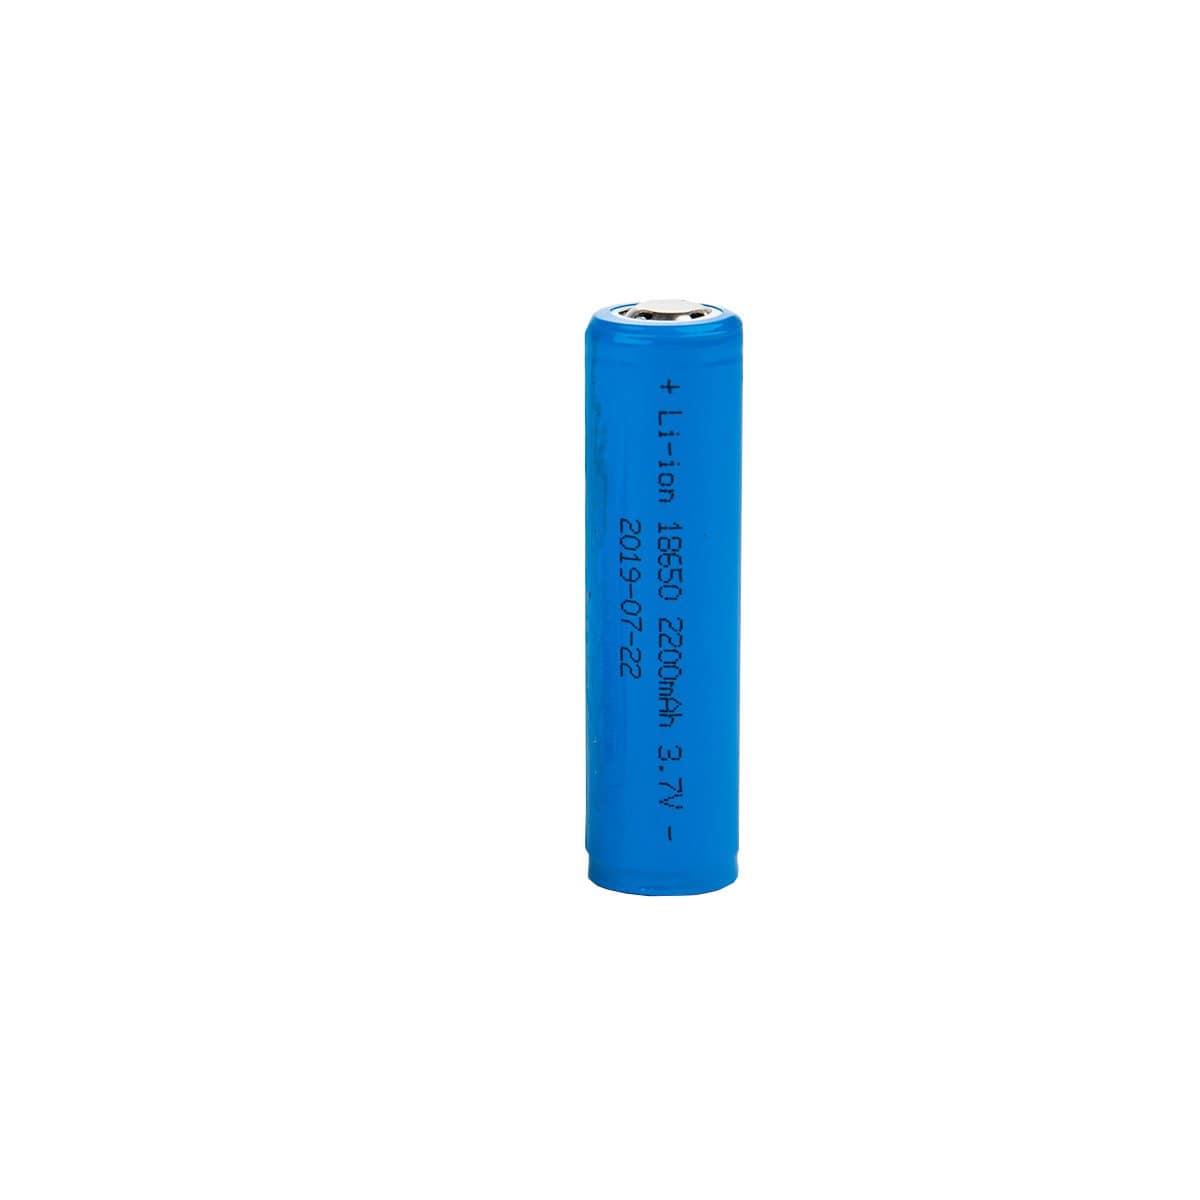 Replacement Li-Ion Rechargeable Battery for NEBO SLYDE King 2K